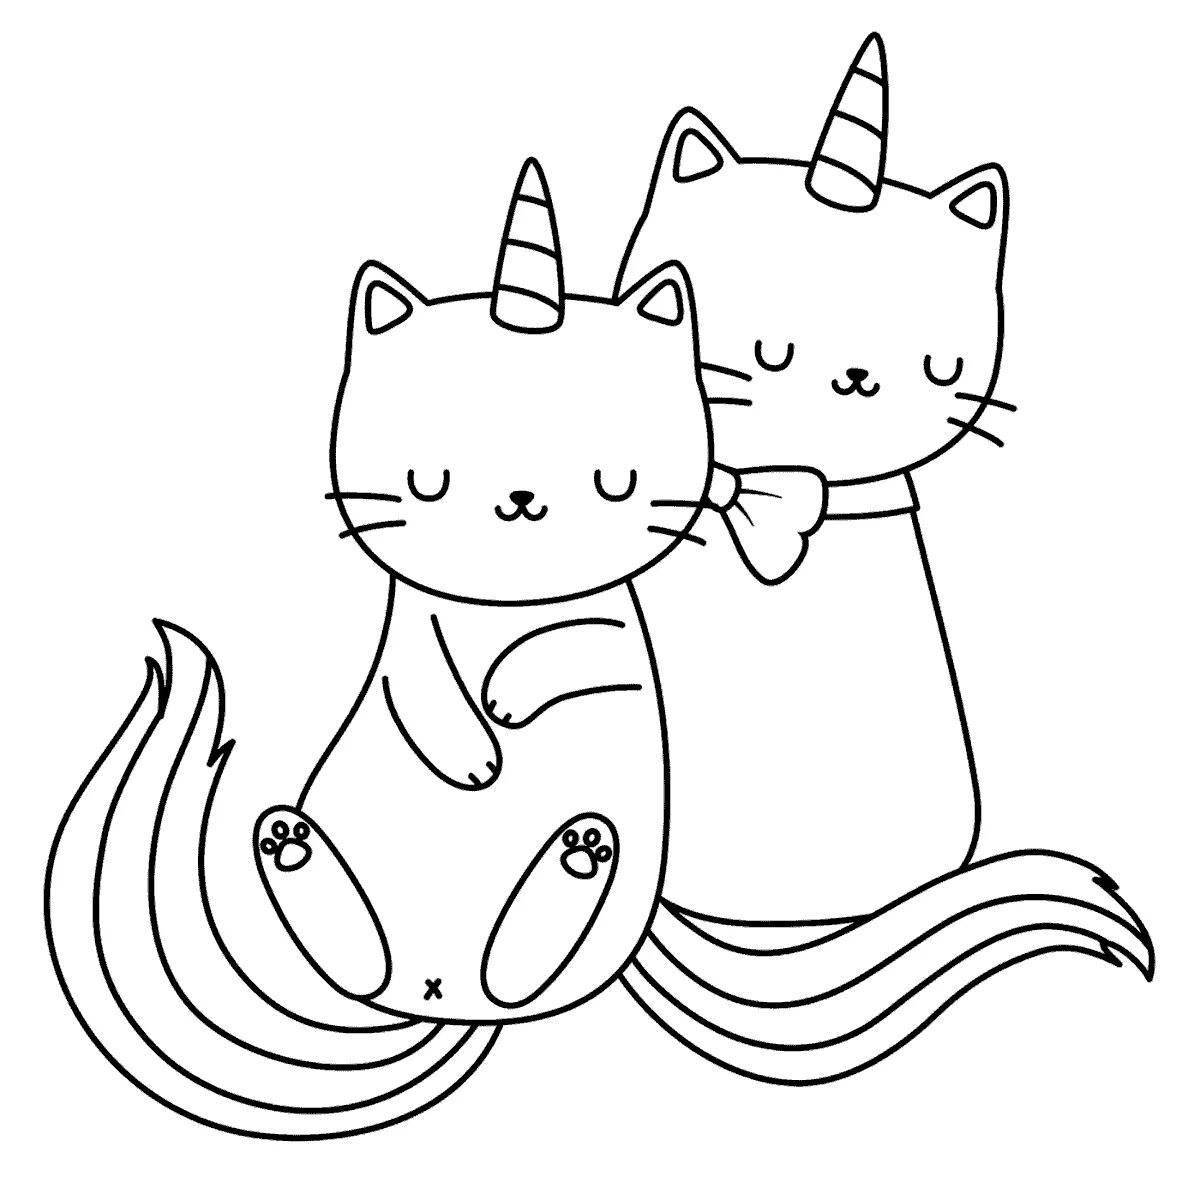 Glitter rainbow cat coloring page